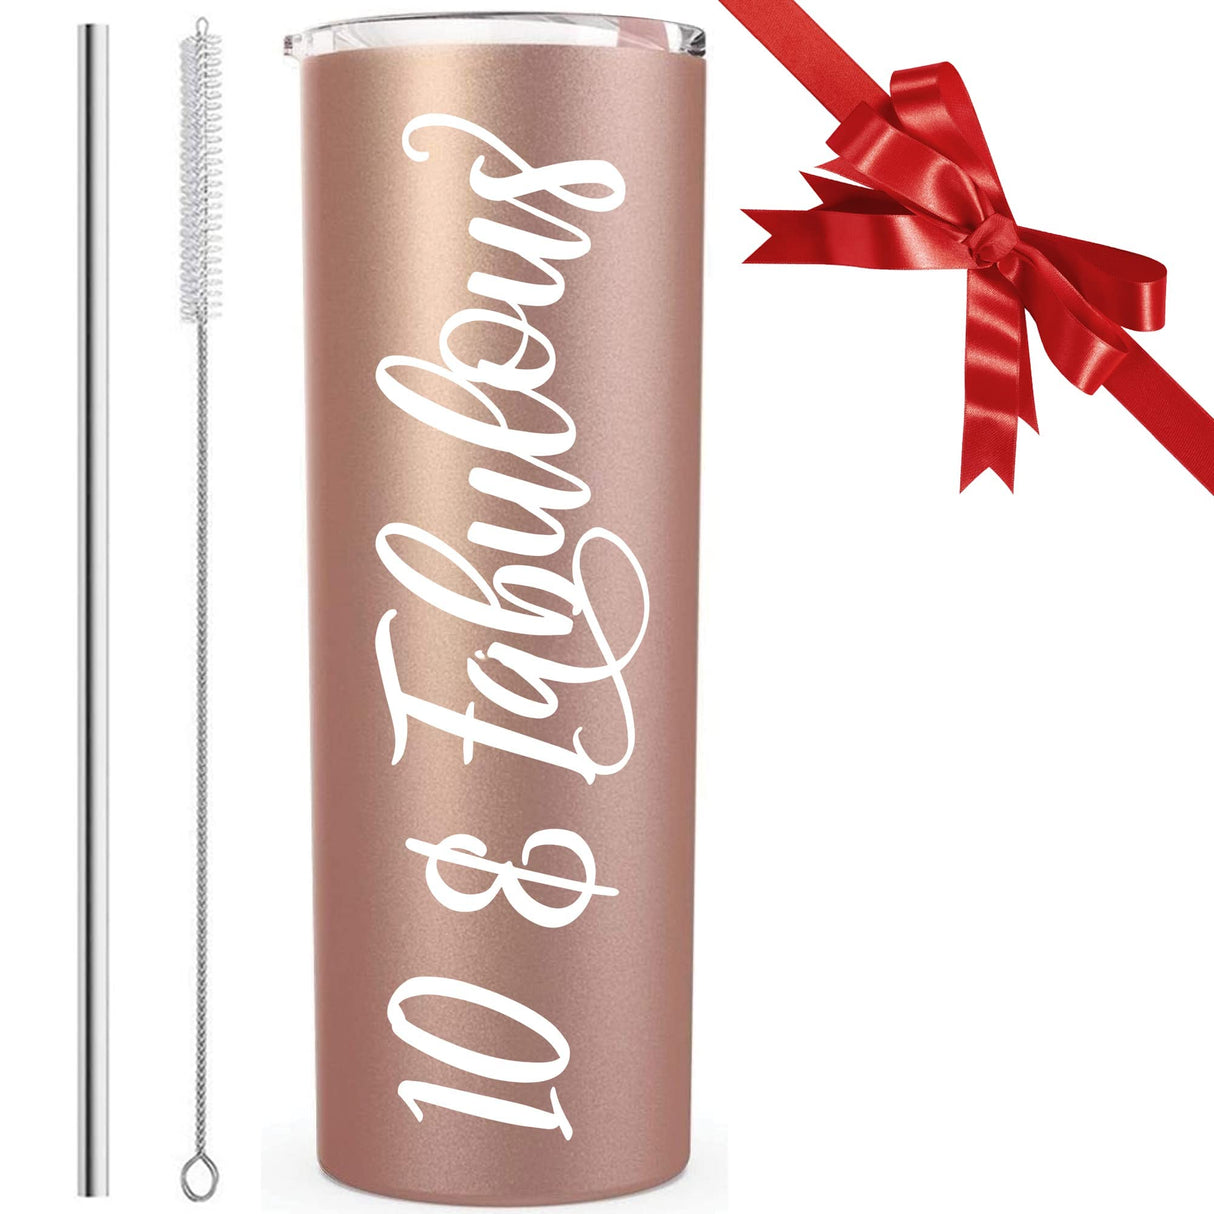 𝗪𝗜𝗡𝗡𝗘𝗥* 50th Birthday Gifts For Women Friends - 20Oz Tumbler Cup, Lid & Straw - Cool Turning 50 th Year Old Woman Decorations, Funny Happy 50 And Fabulous Rose Gold Fifty Party PARIS PRODUCTS CO